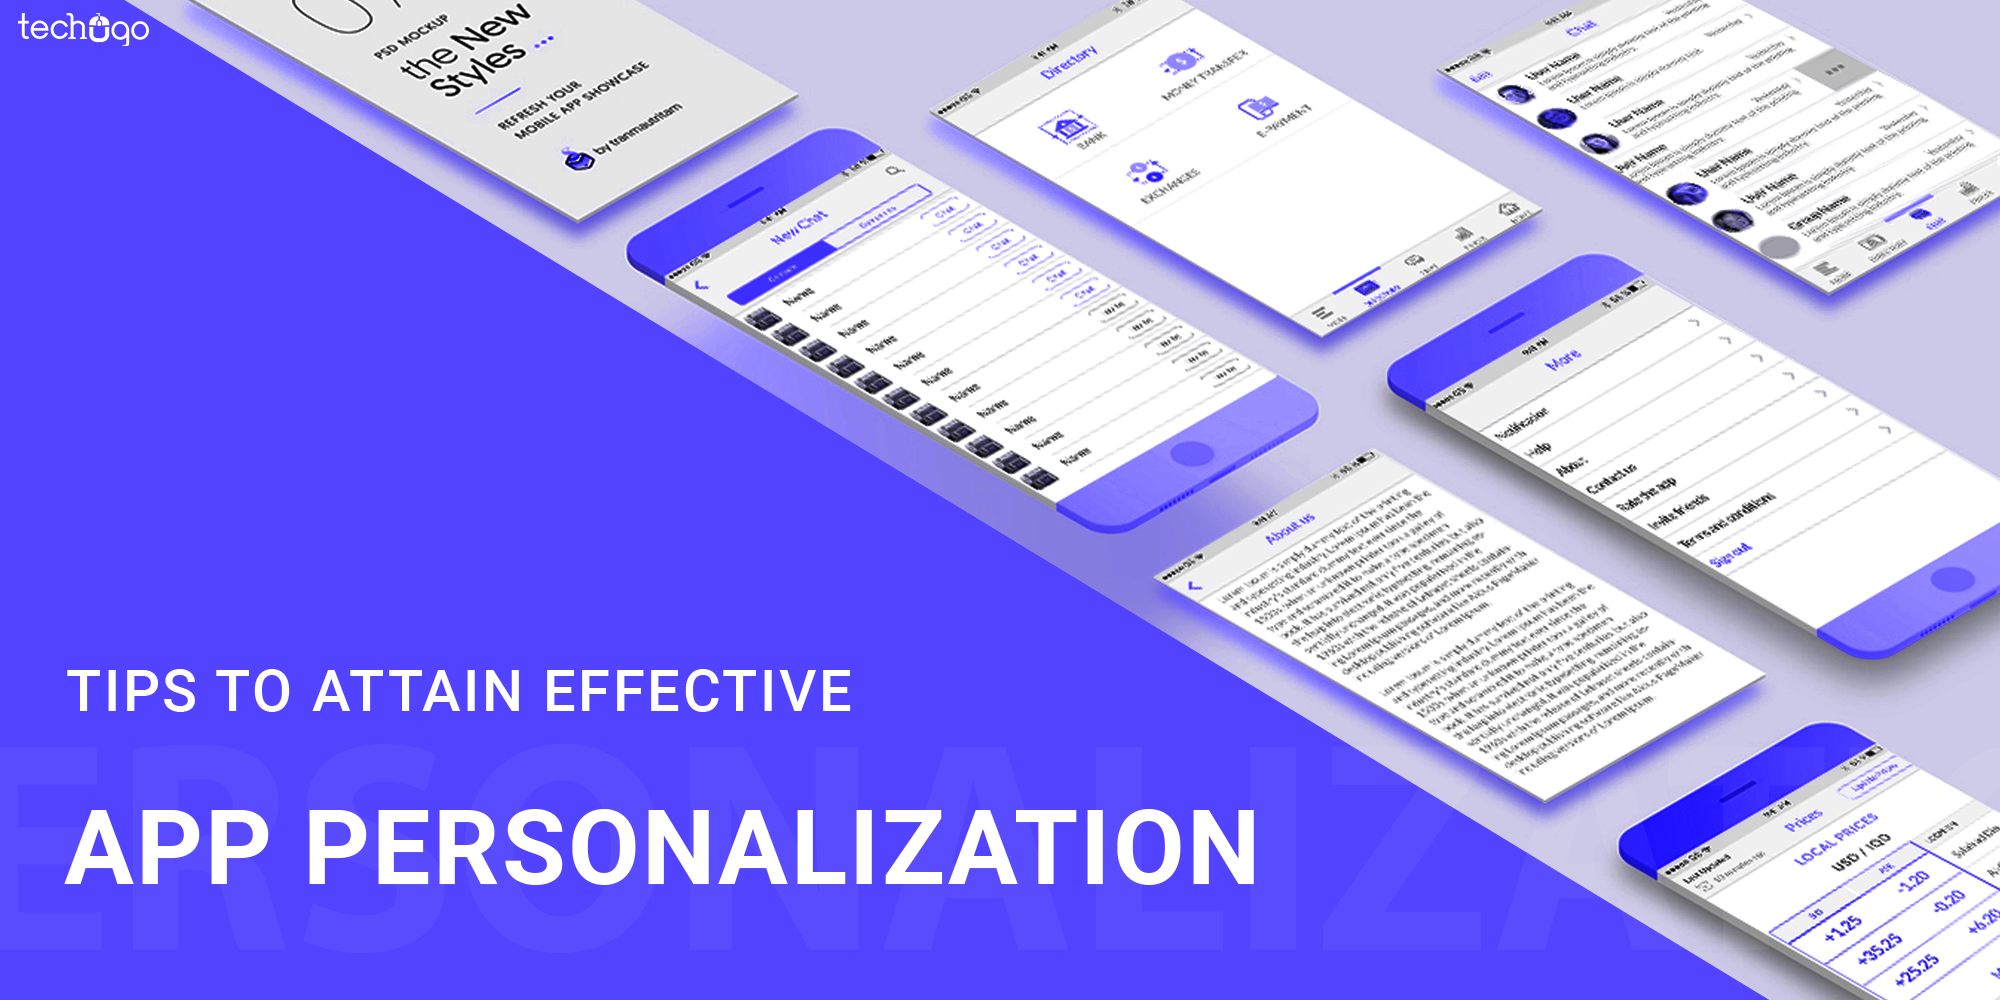 TIPS TO ATTAIN EFFECTIVE APP PERSONALIZATION